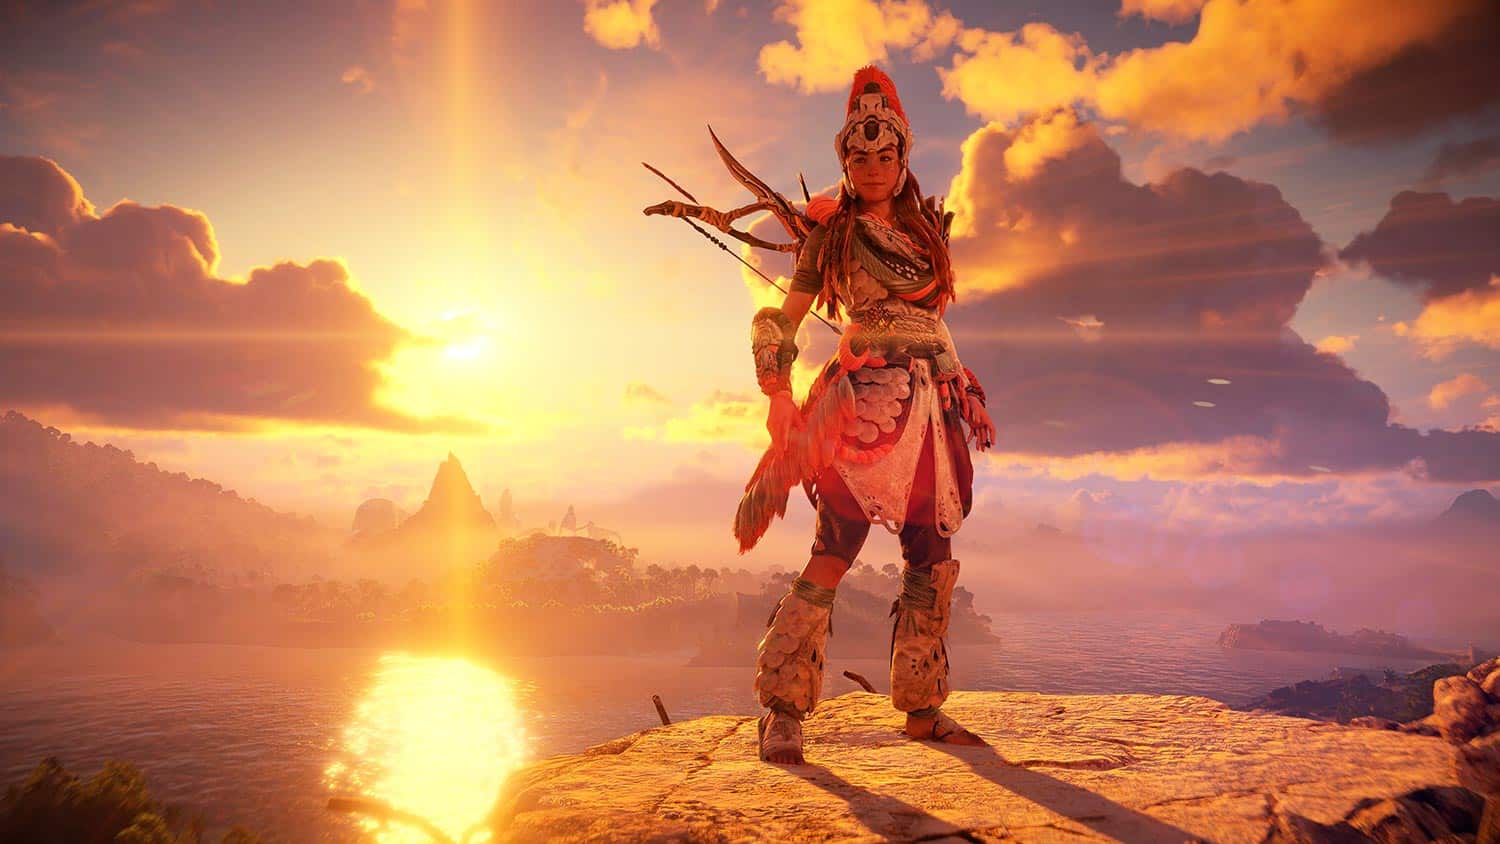 Aloy standing up against a beautiful sunset. Still from Horizon Forbidden West: Burning Shores DLC